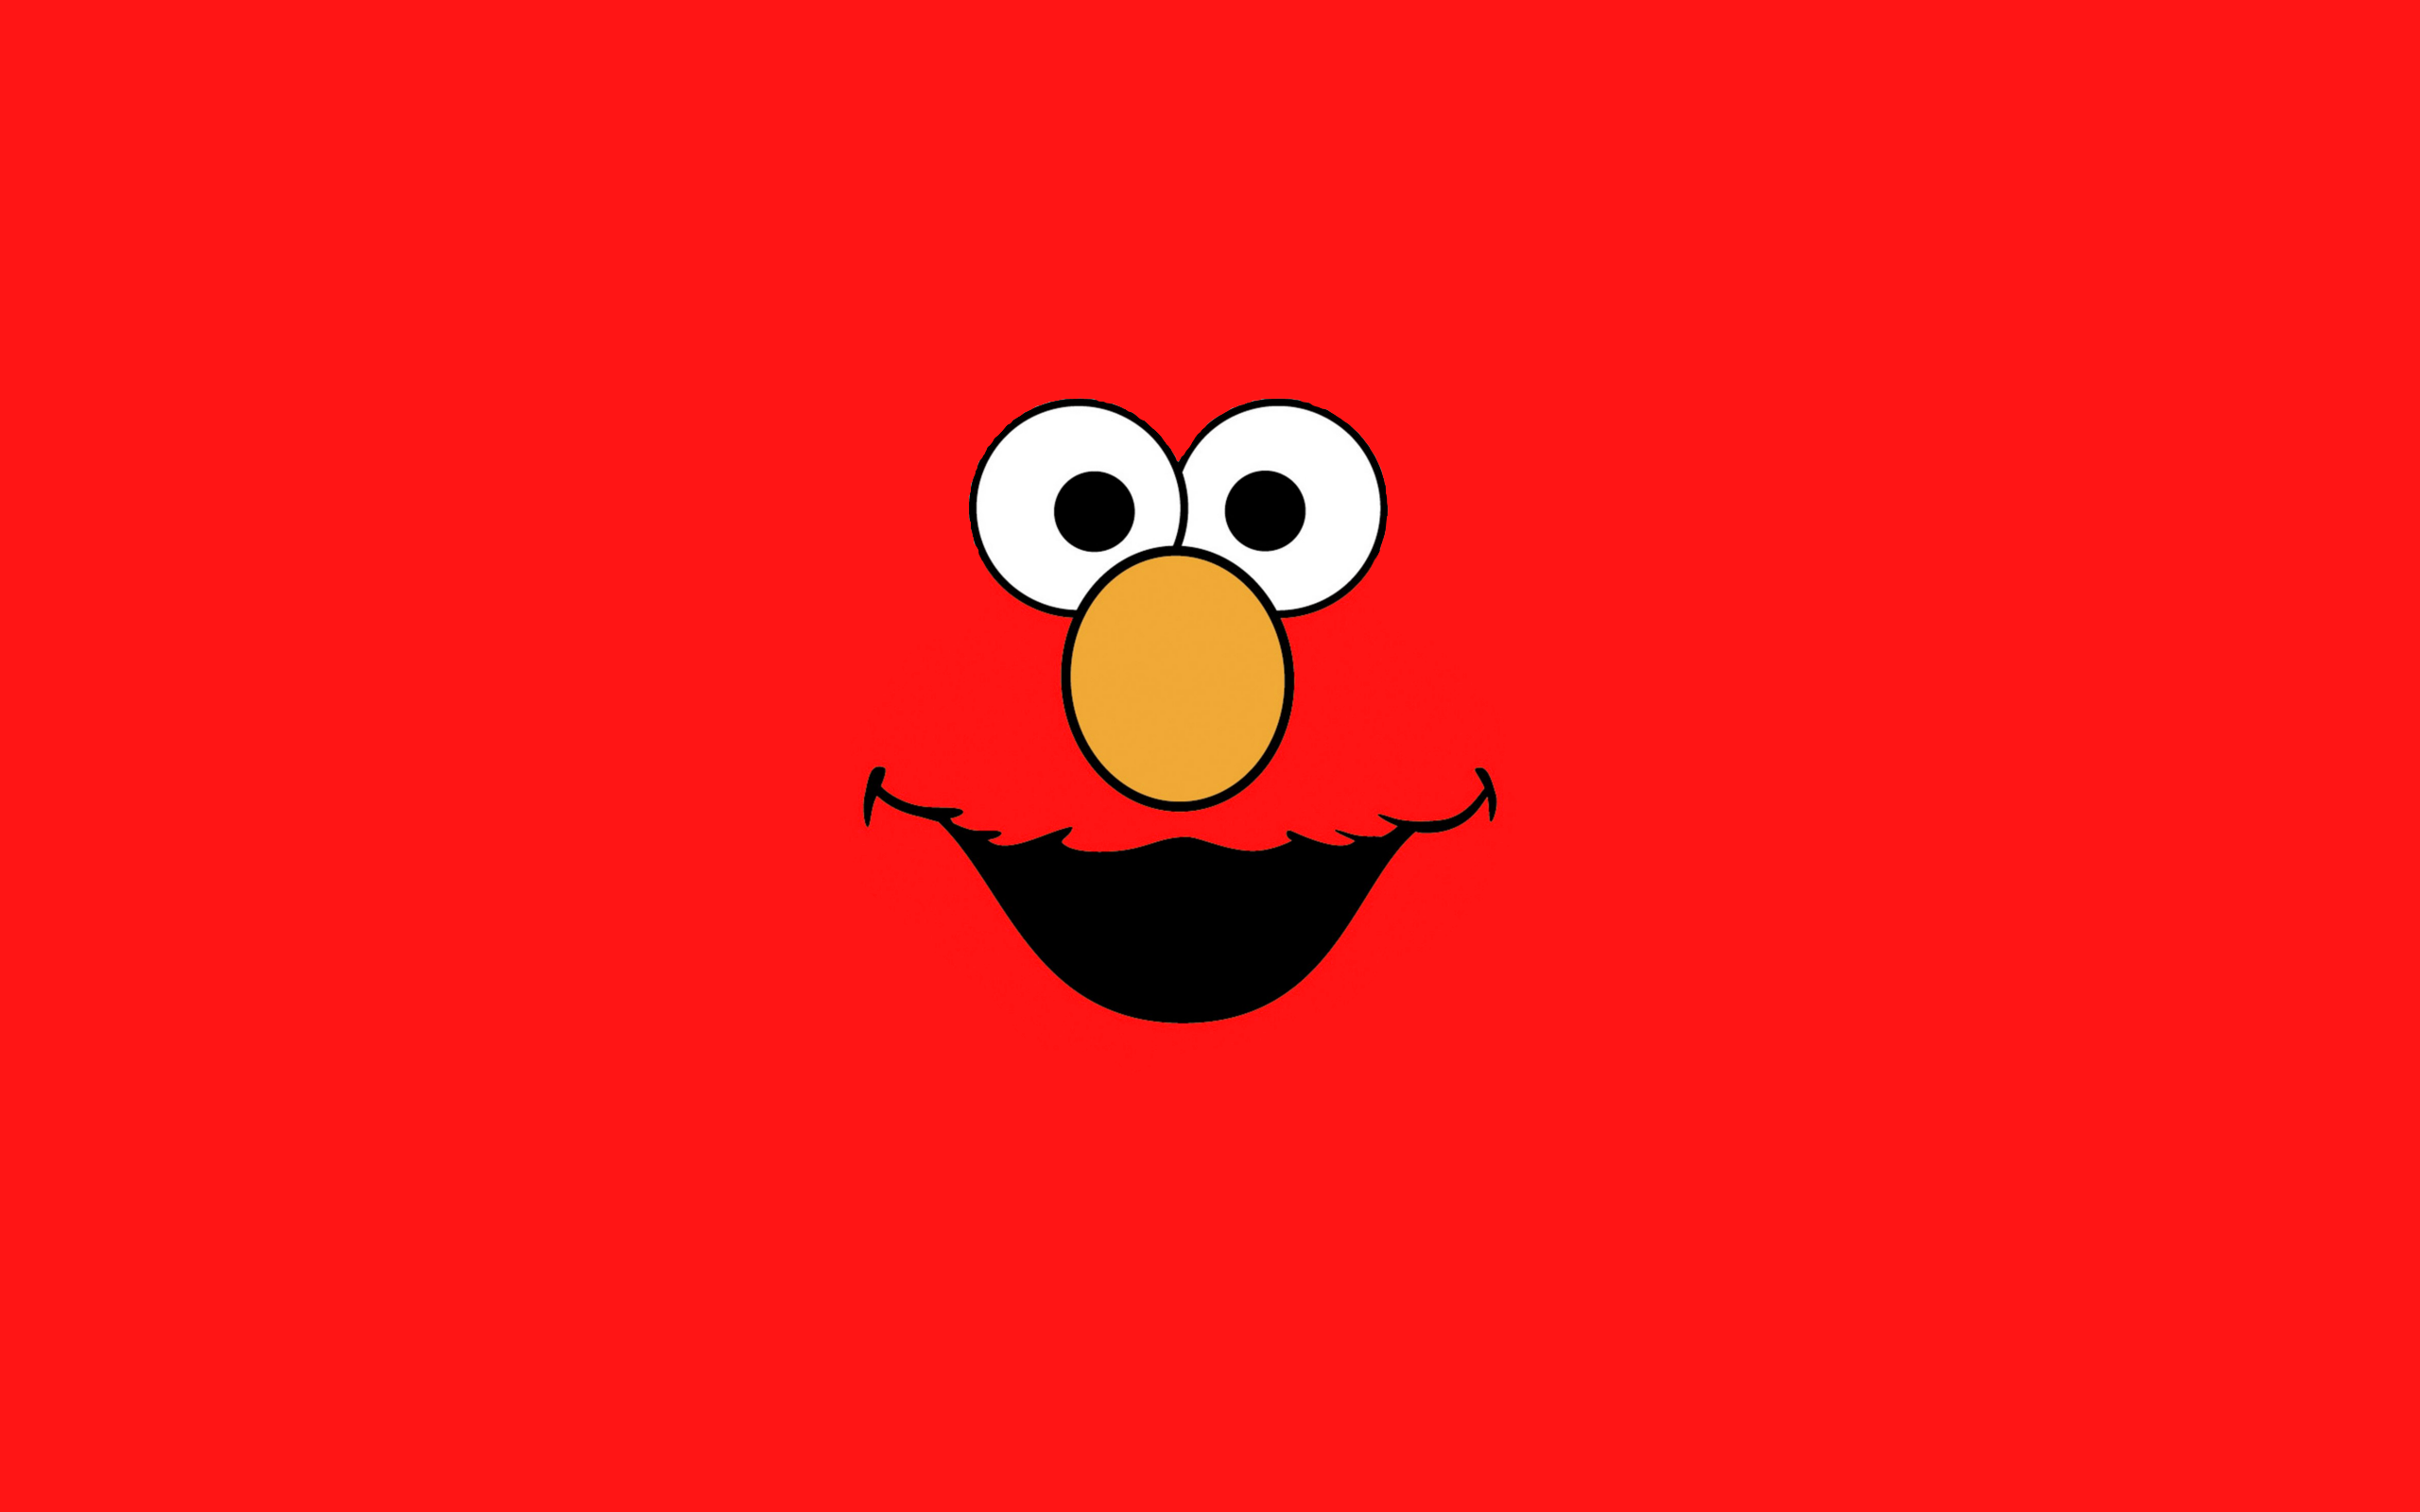 HD Elmo Wallpapers and Photos